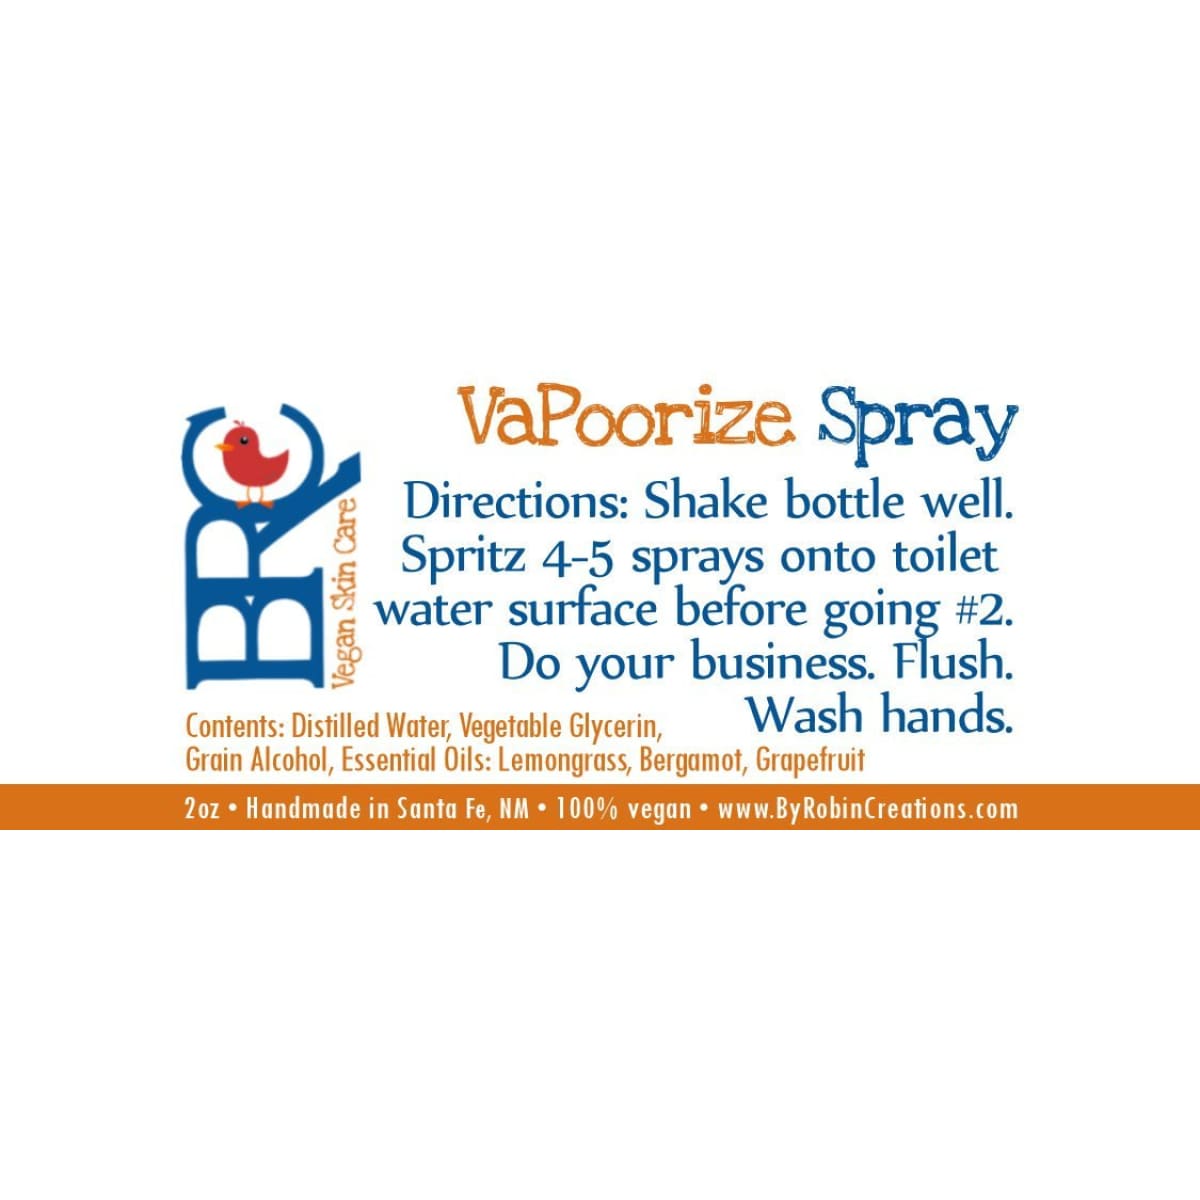 LAST CHANCE! - VaPoorize "use before you poo" Spray | By Robin Creations 